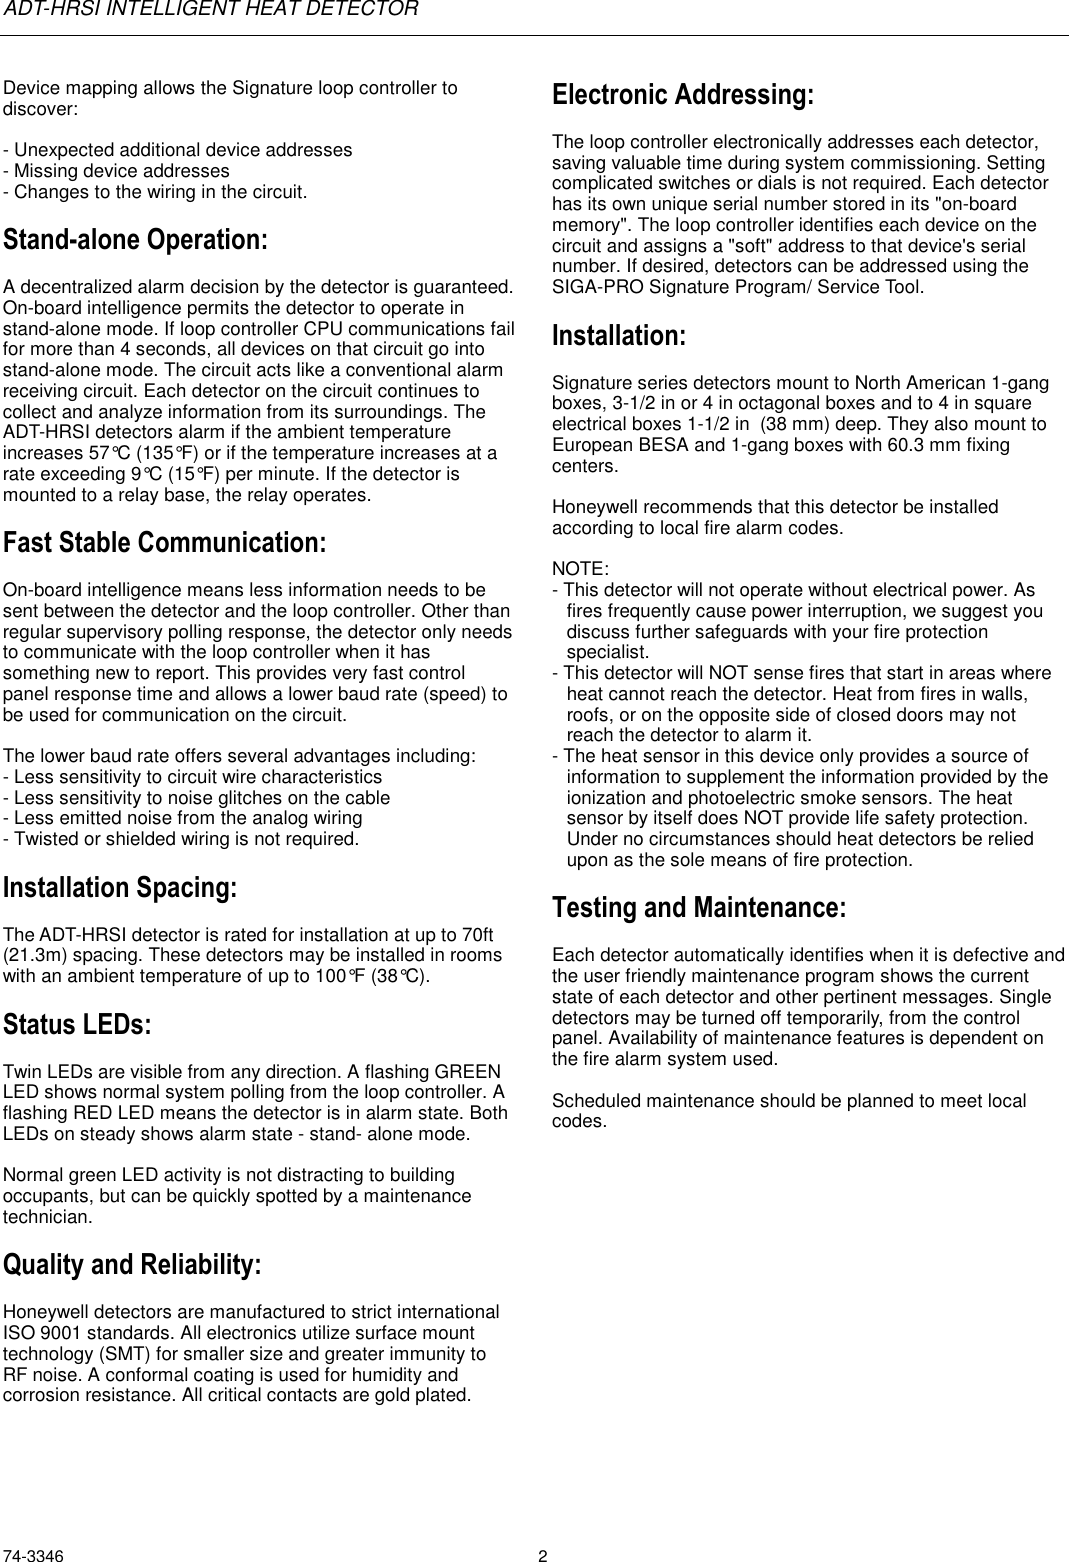 Page 2 of 4 - Honeywell Honeywell-Excel-Adt-Hrsi-Users-Manual- 74-3346 - ADT-HRSI Intelligent Heat Detector  Honeywell-excel-adt-hrsi-users-manual